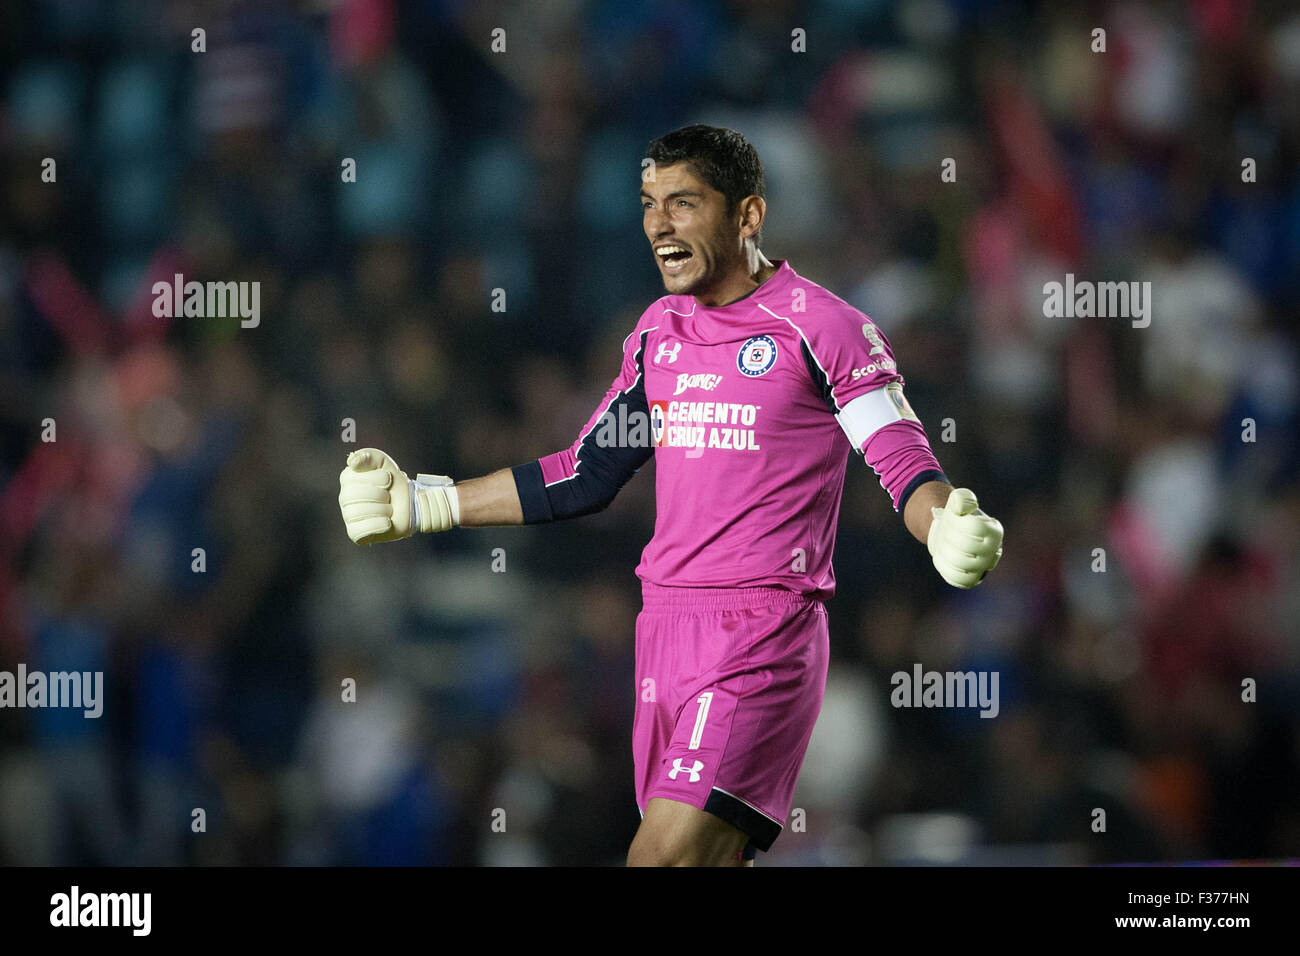 Mexico City, Mexico. 30th Sep, 2015. Cruz Azul's goalkeeper Jesus Corona  celebrates a goal during the match of 2015 Opening Tournament of MX League  against Atlas in Mexico City, capital of Mexico